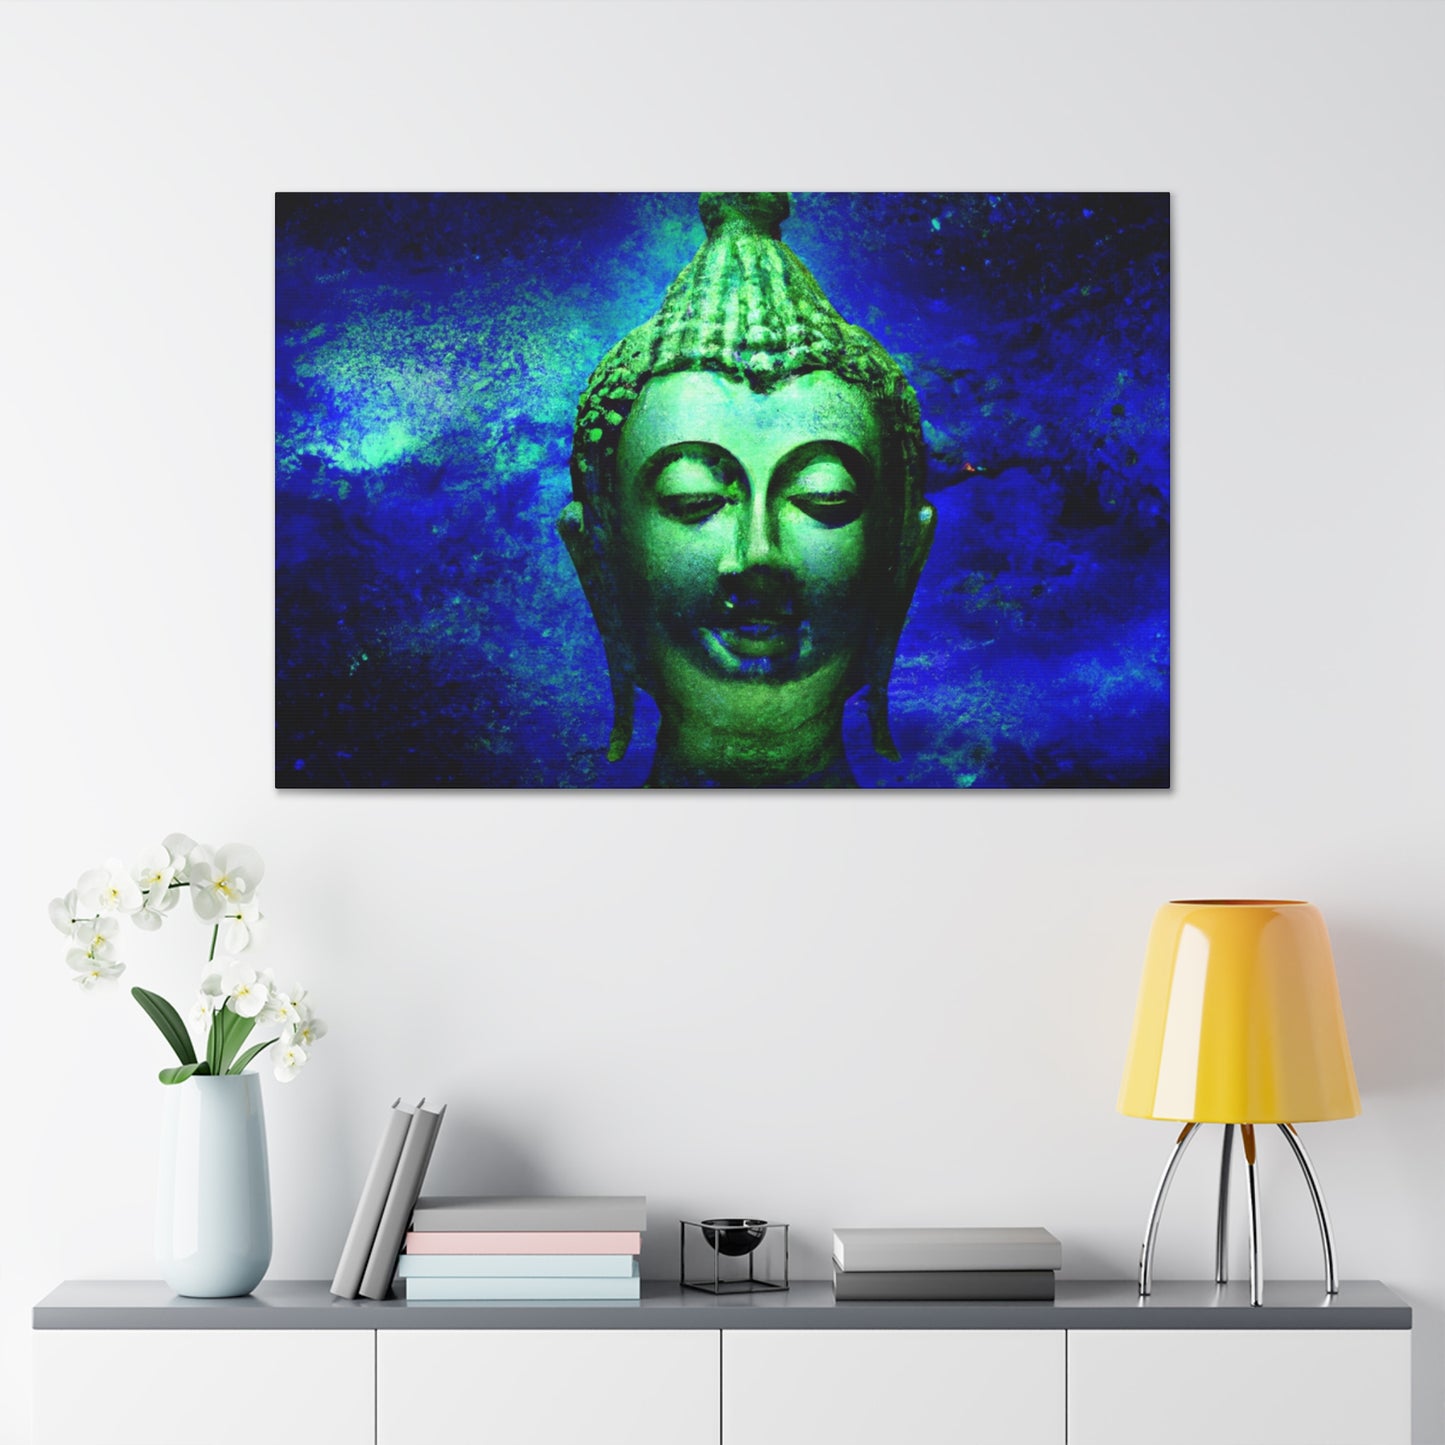 Sumanapala the Wise. - Canvas